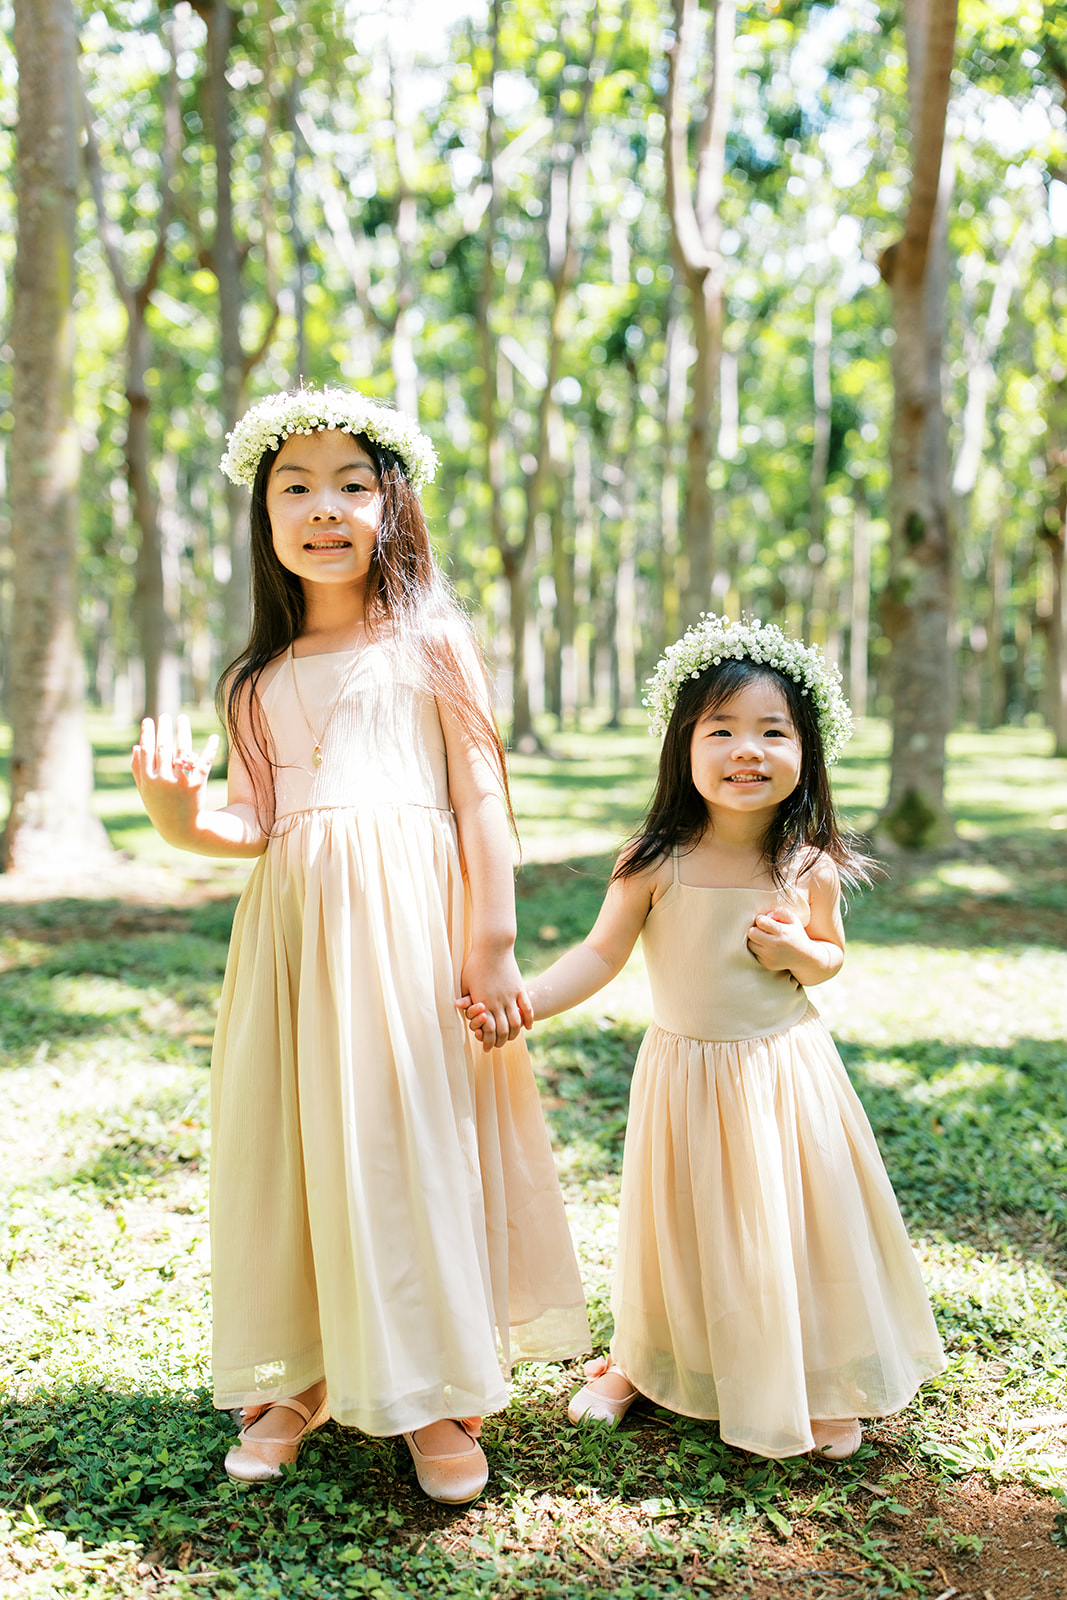 Two young girls in matching dresses and floral crowns standing in a sunlit forest Wedding at Na ‘Āina Kai Botanical